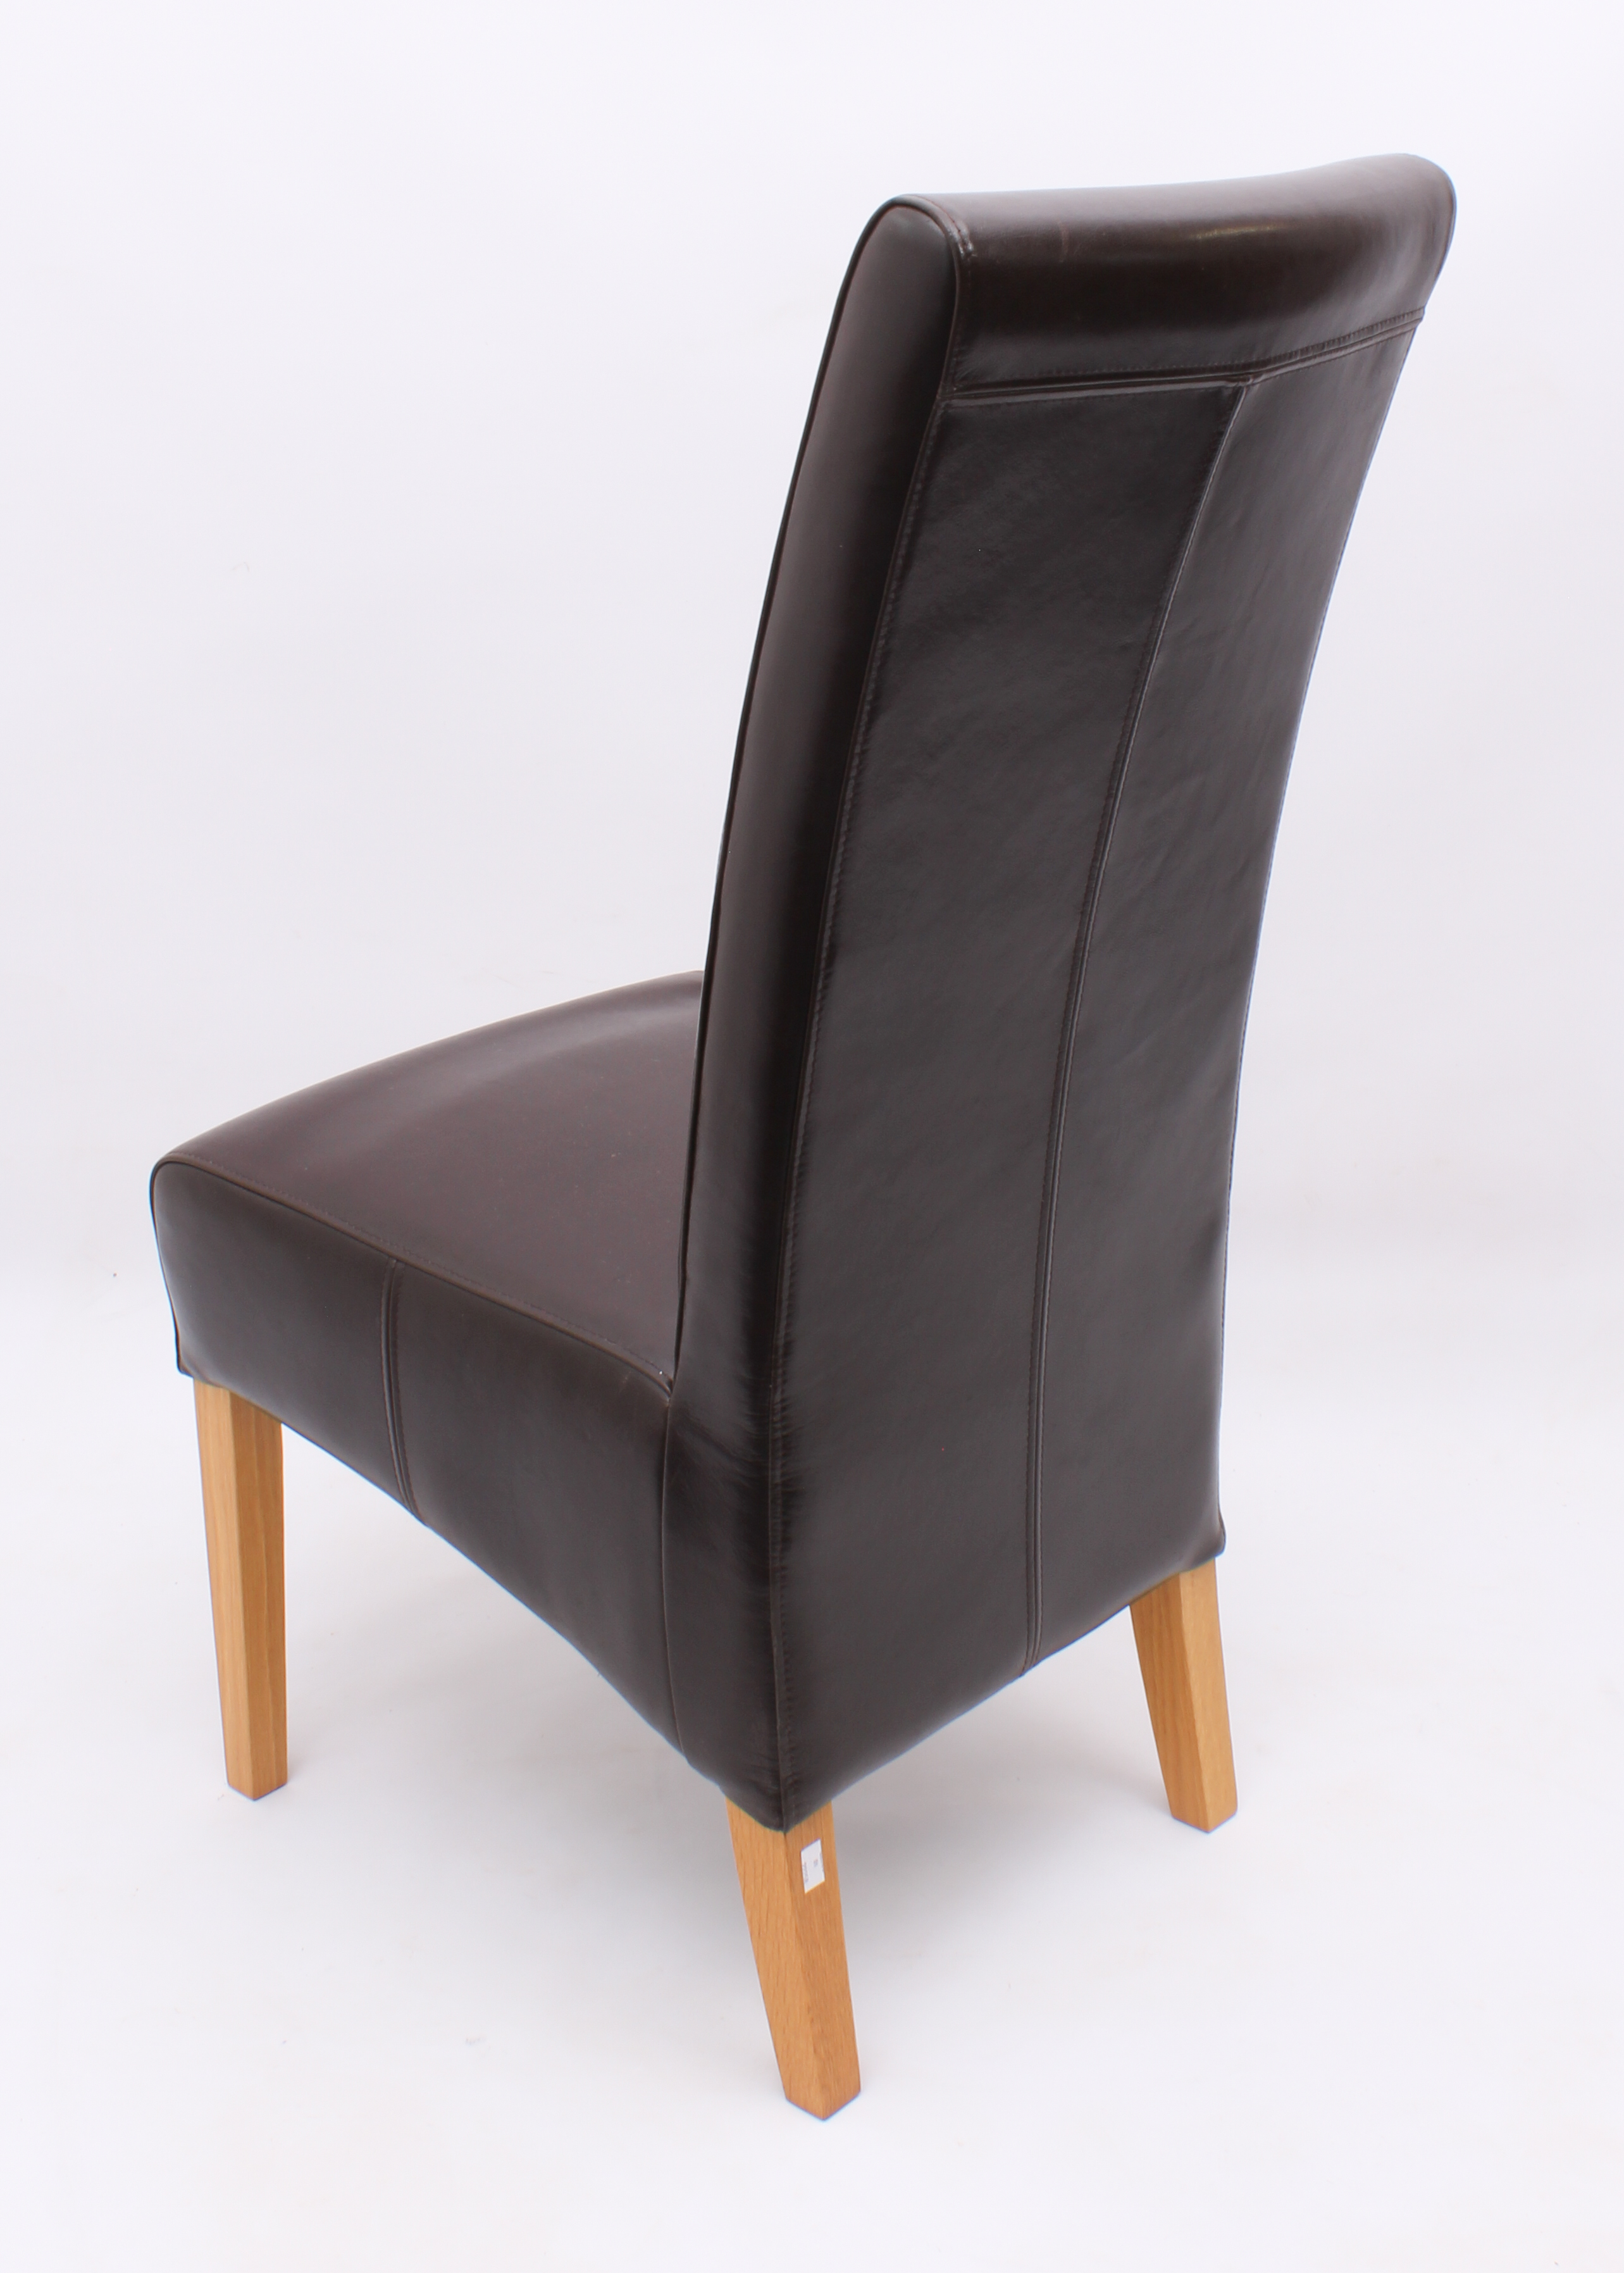 A set of four chocolate-brown leather and oak high-back dining chairs - modern, 48 cm wide, 108.5 cm - Image 3 of 3